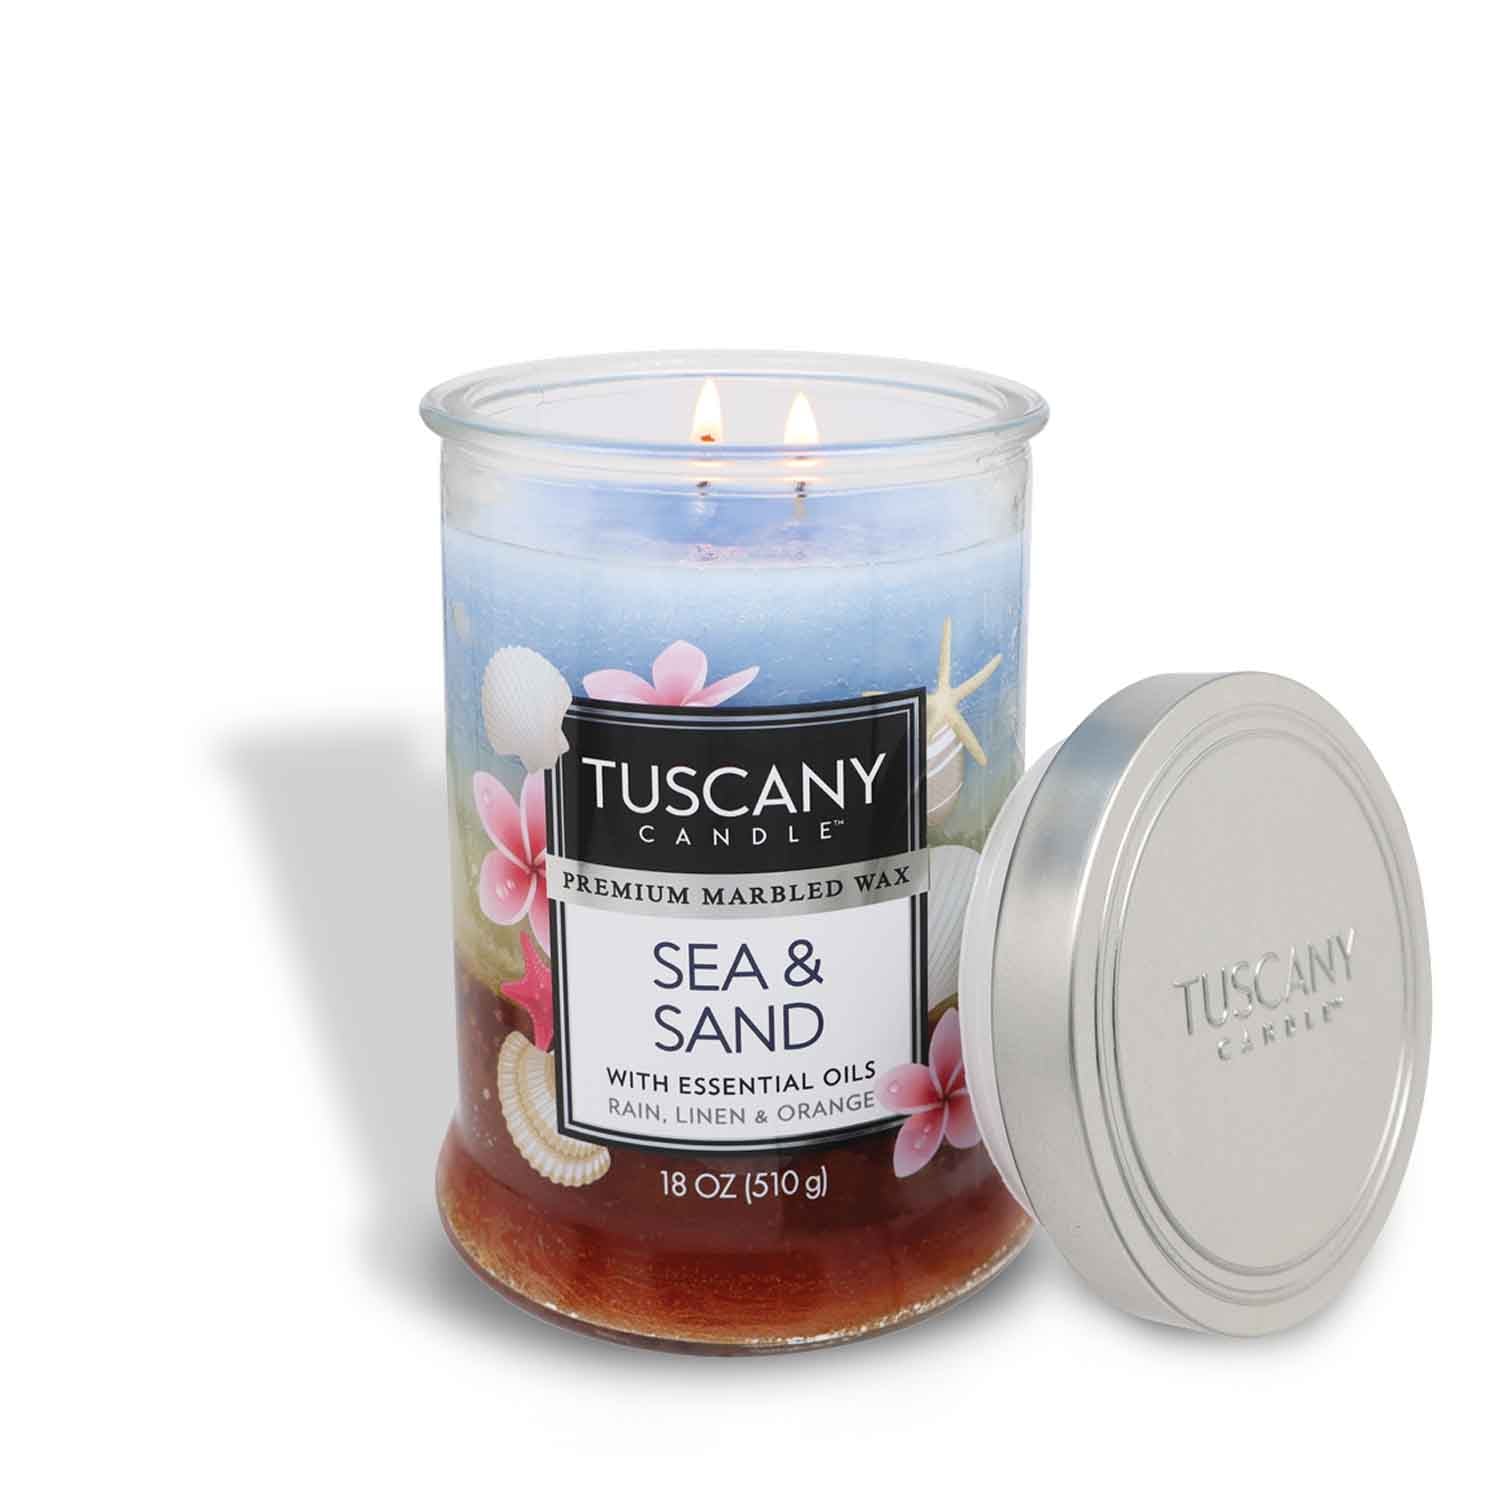 Tuscany Sea & Sand Candle: Experience the invigorating fragrance of the Sea & Sand Long-Lasting Scented Jar Candle (18 oz), crafted with essential oils from Tuscany Candle® EVD.